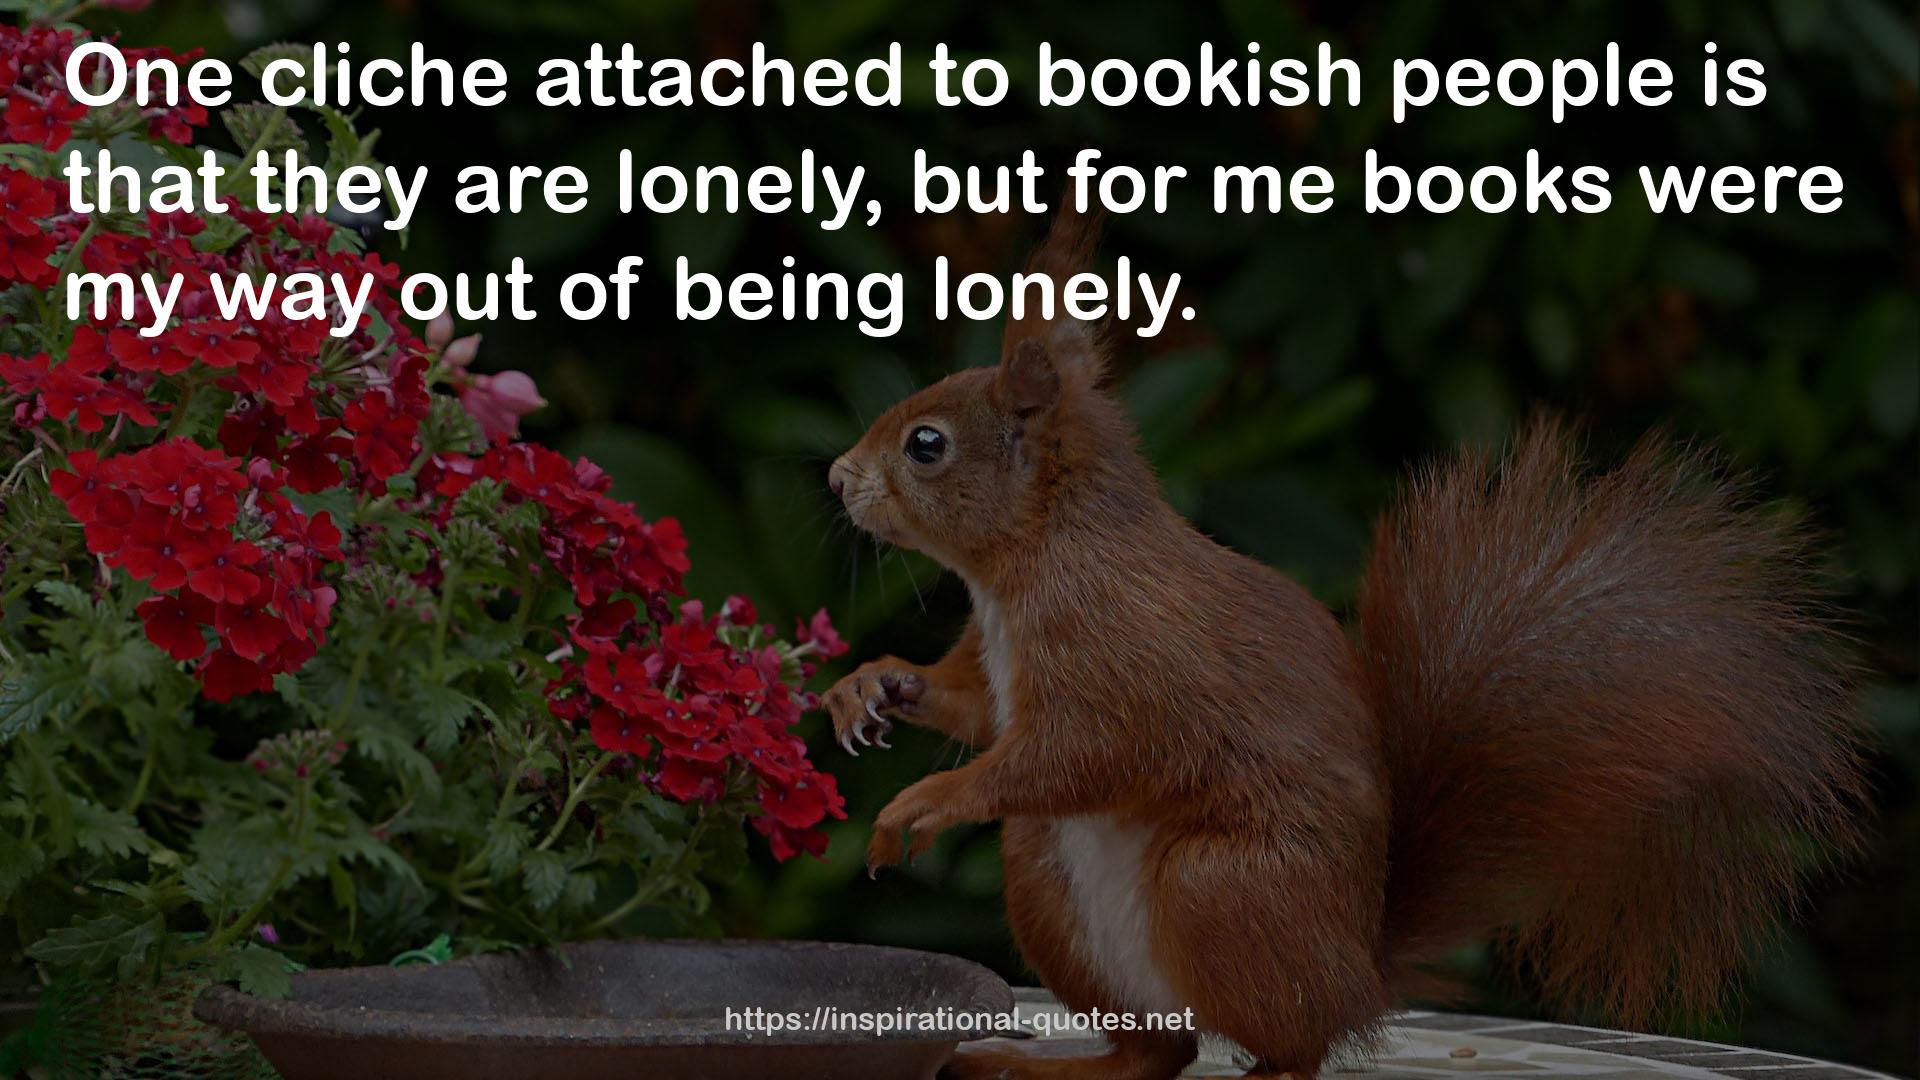 Bookish people  QUOTES